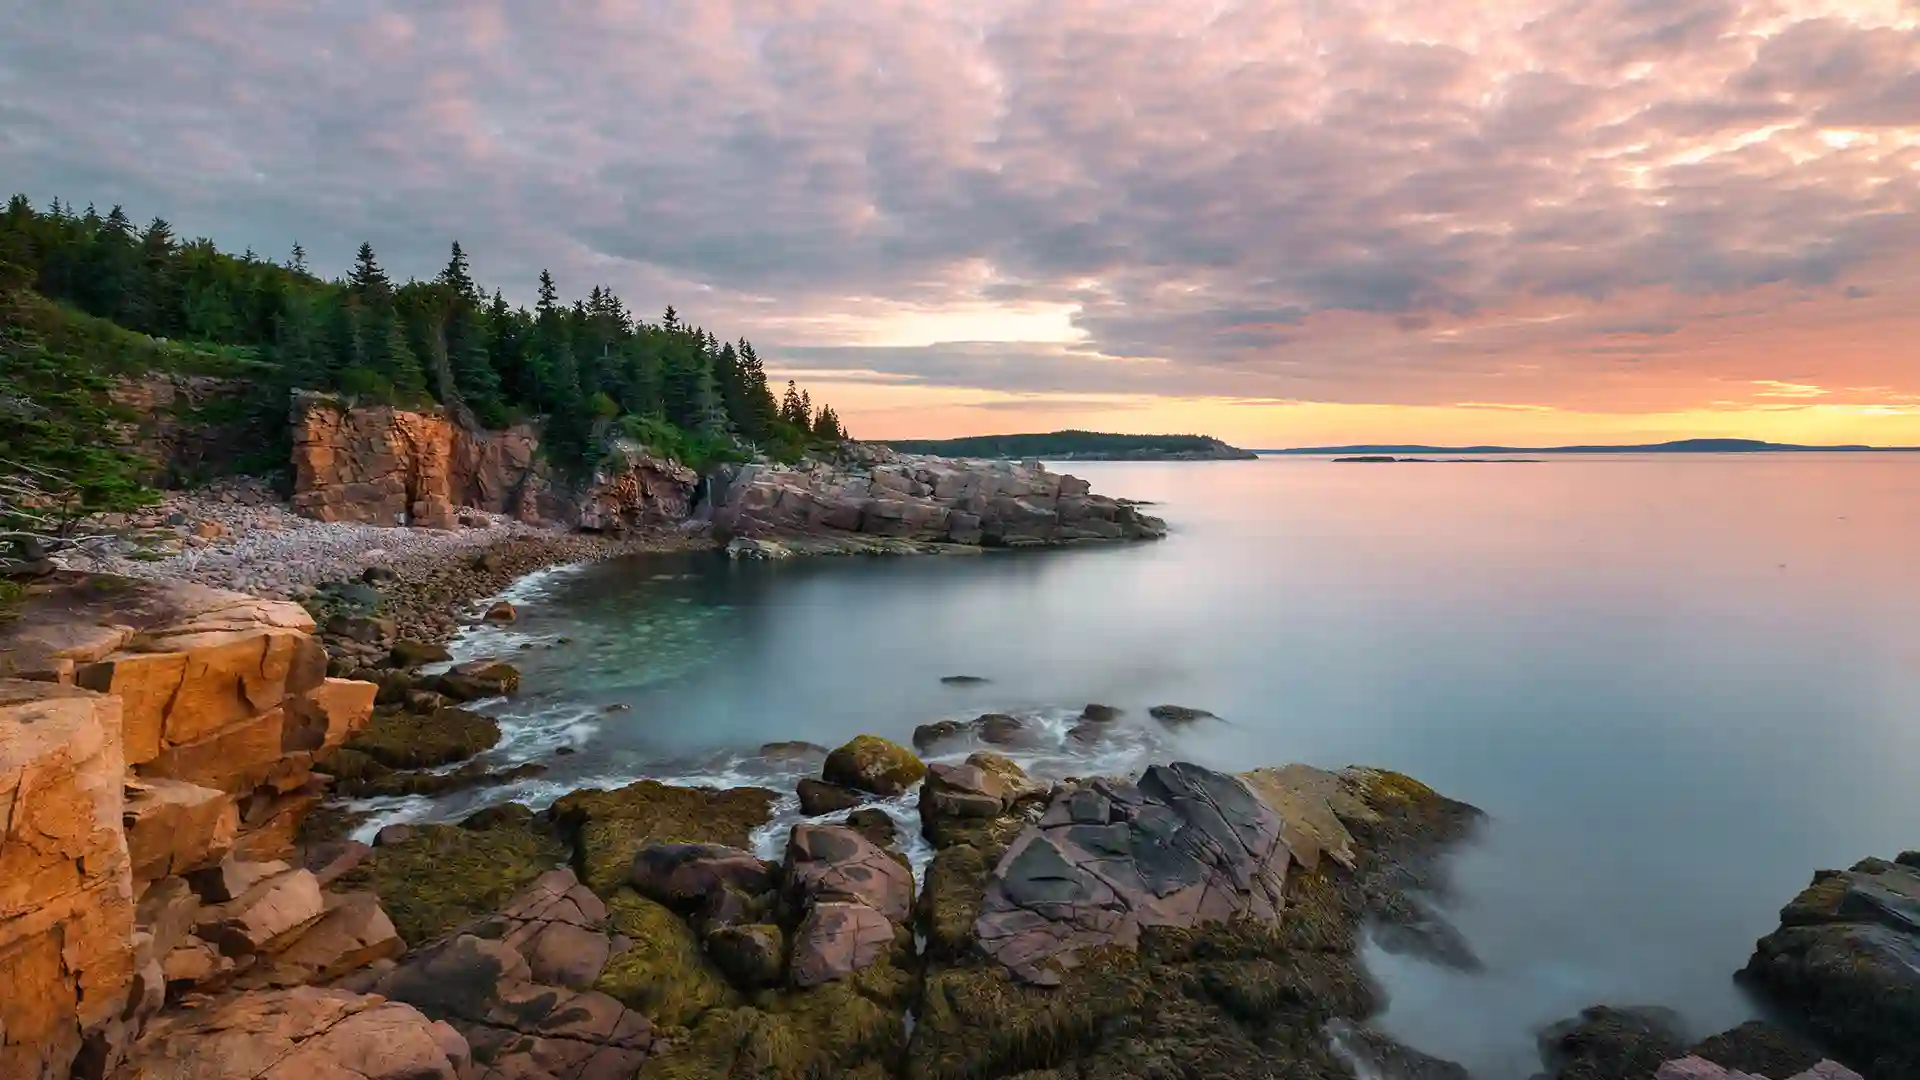 View of Acadia National Park, with its dramatic rocky cliffs, along the shore in Maine.